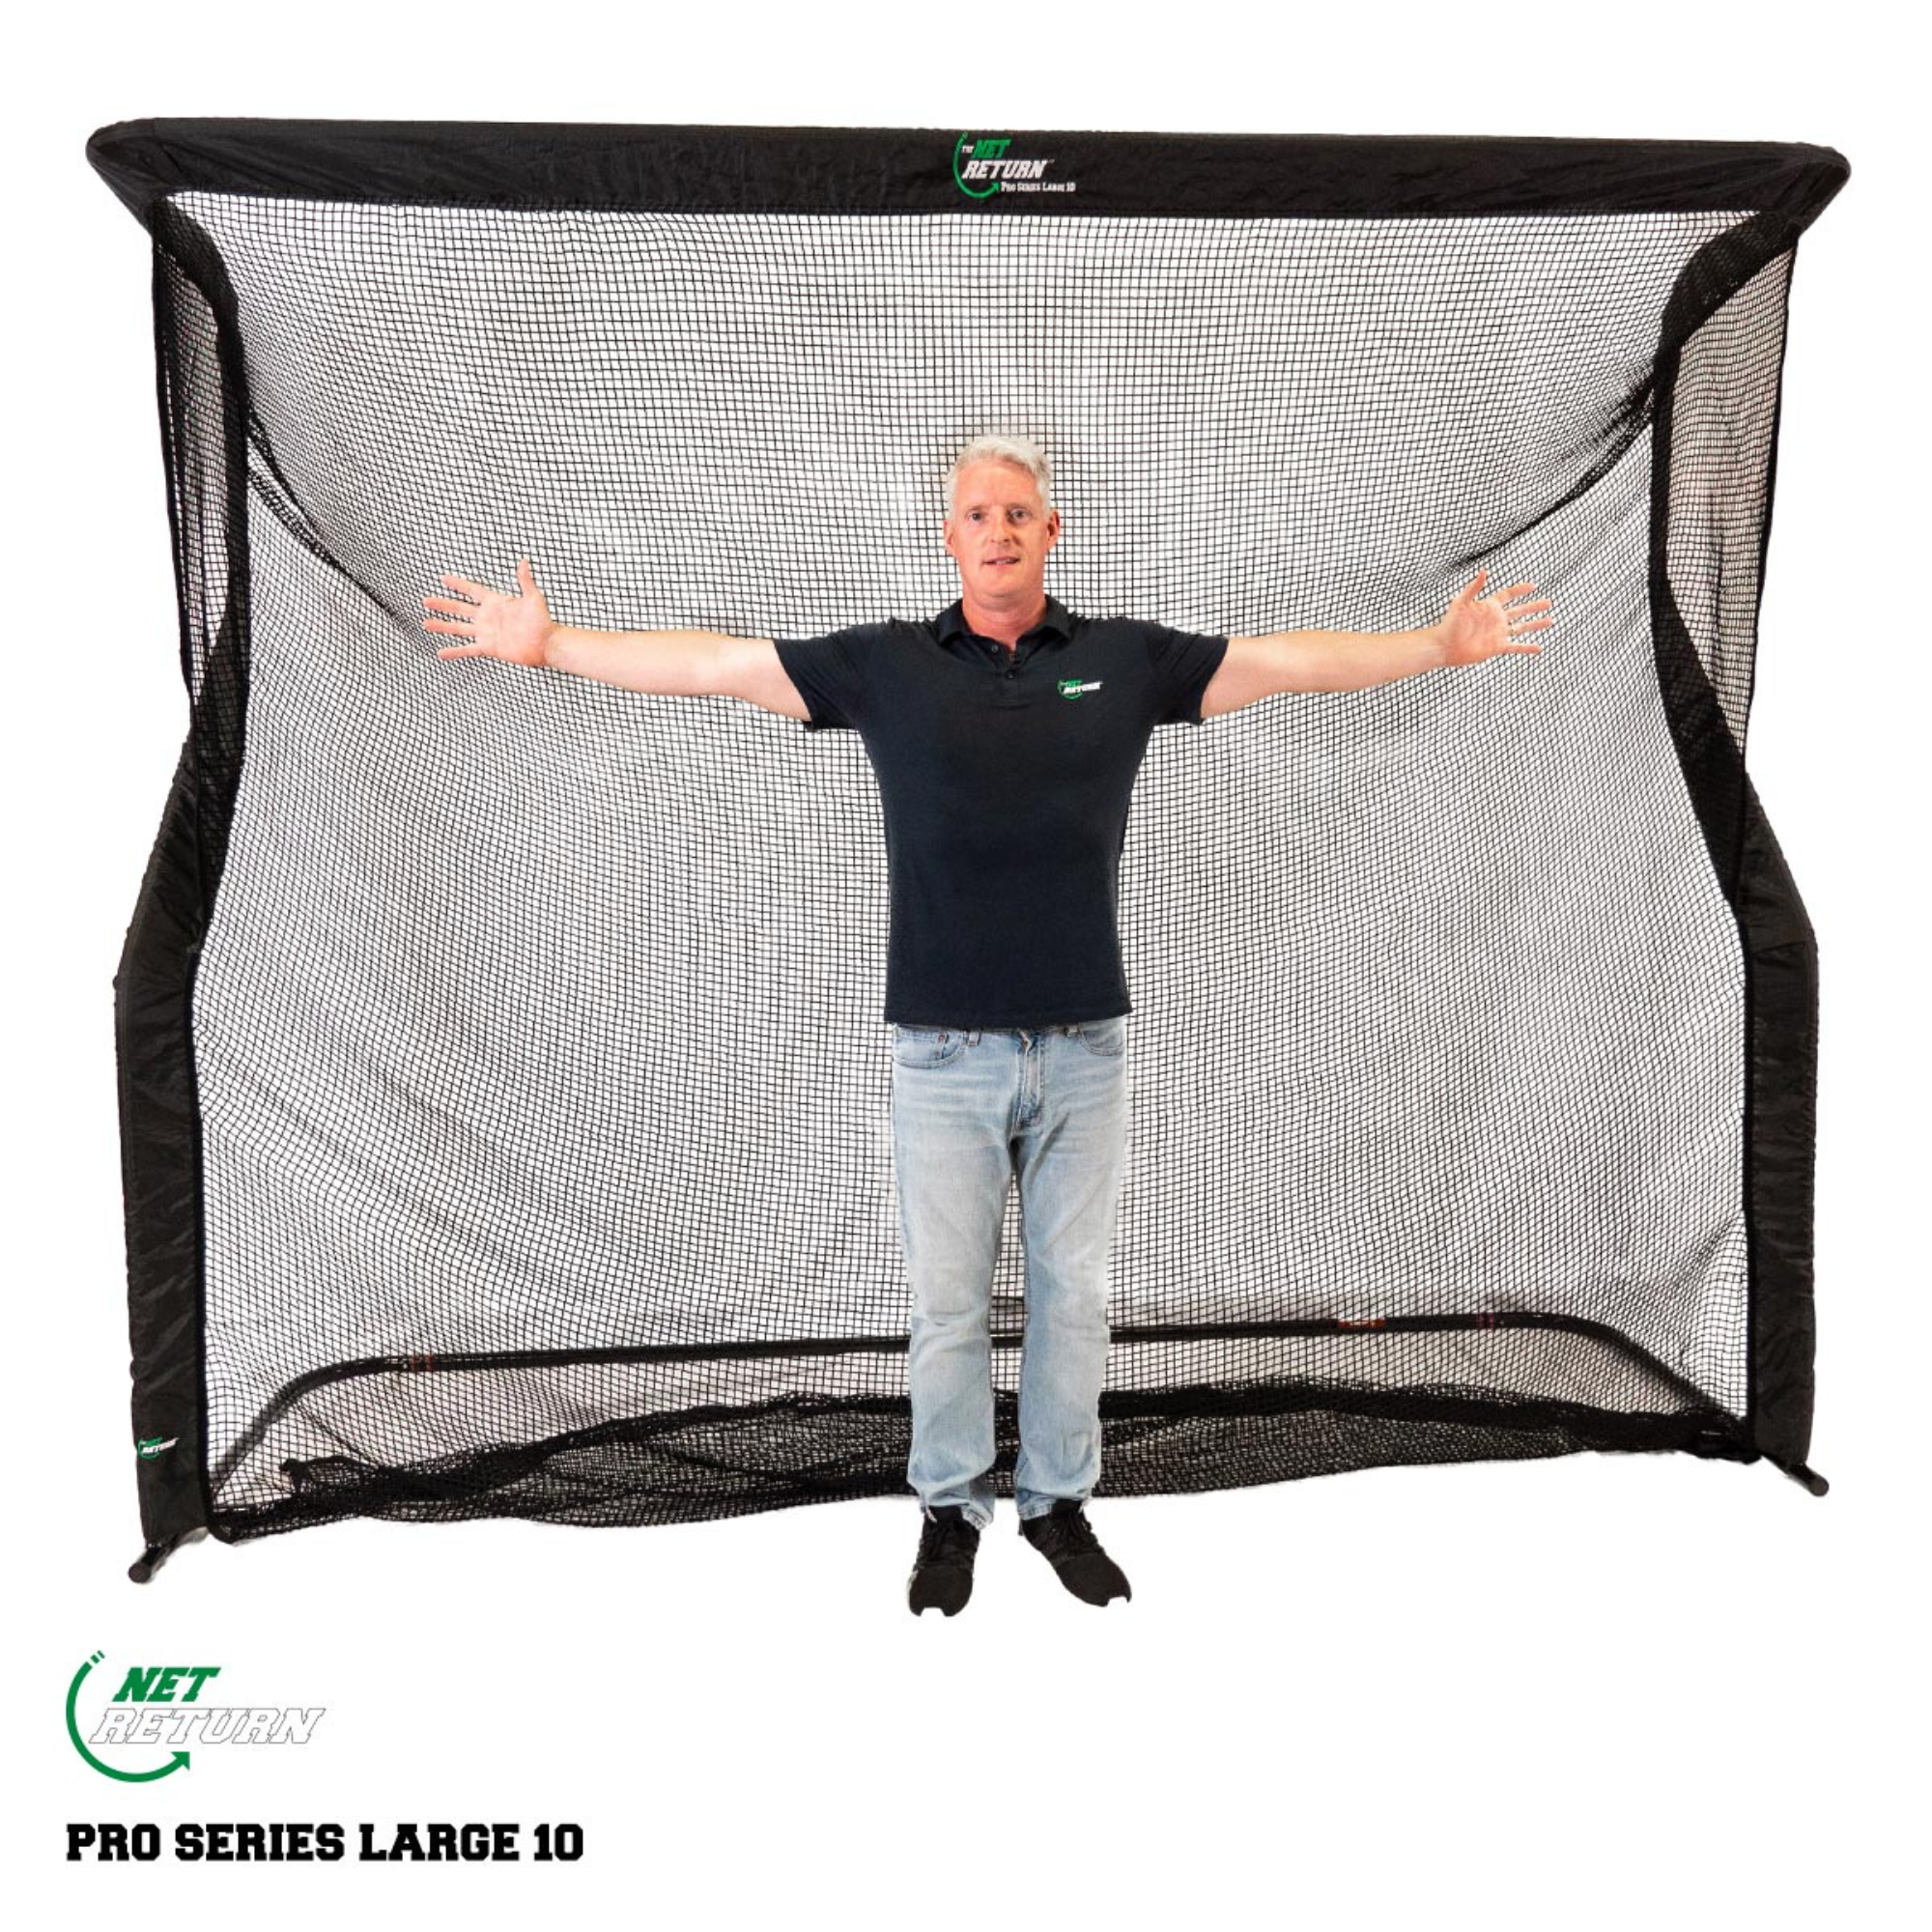 The Net Return Large 10' Pro Package